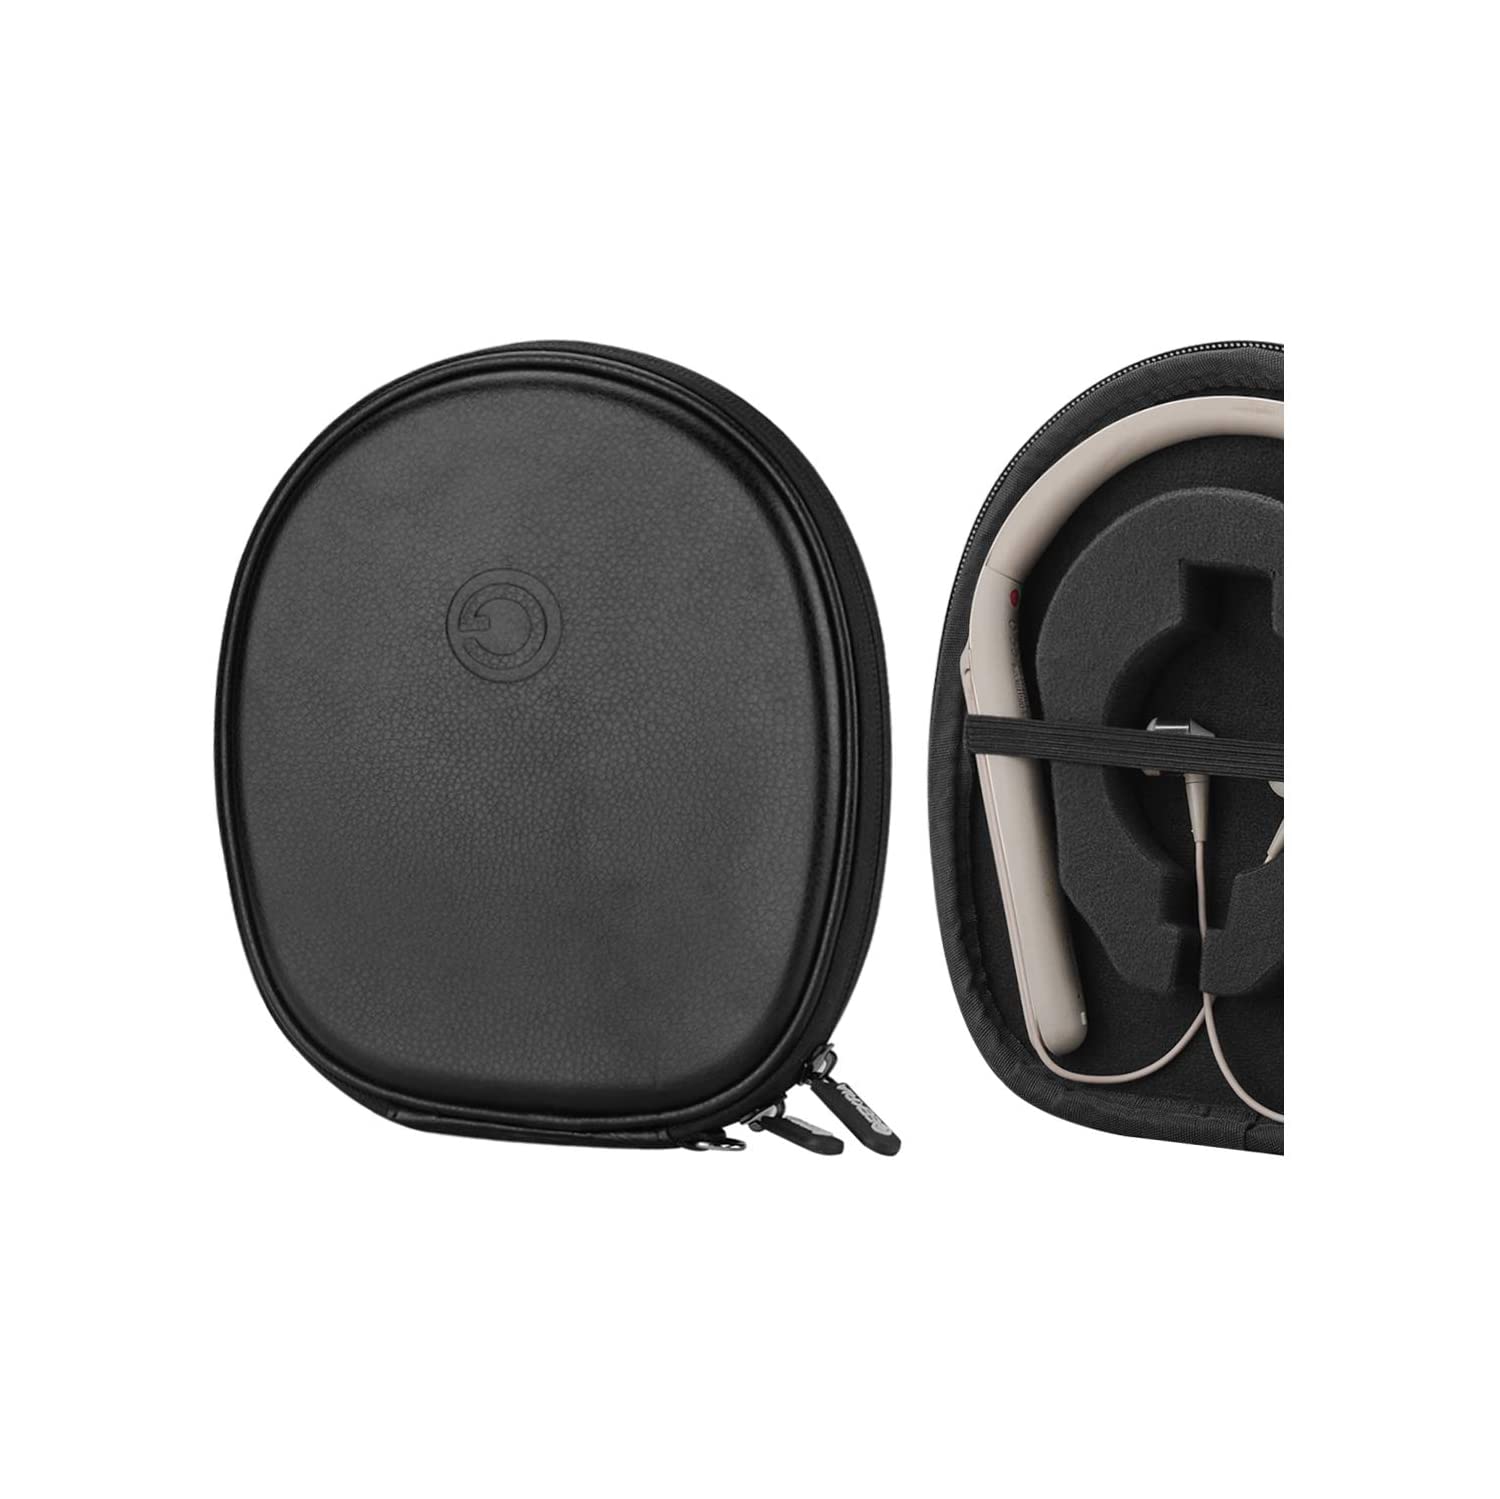 UltraShell Case Compatible with Audio-Technica, Bose, , , LG, , Sony Headphones, Replacement